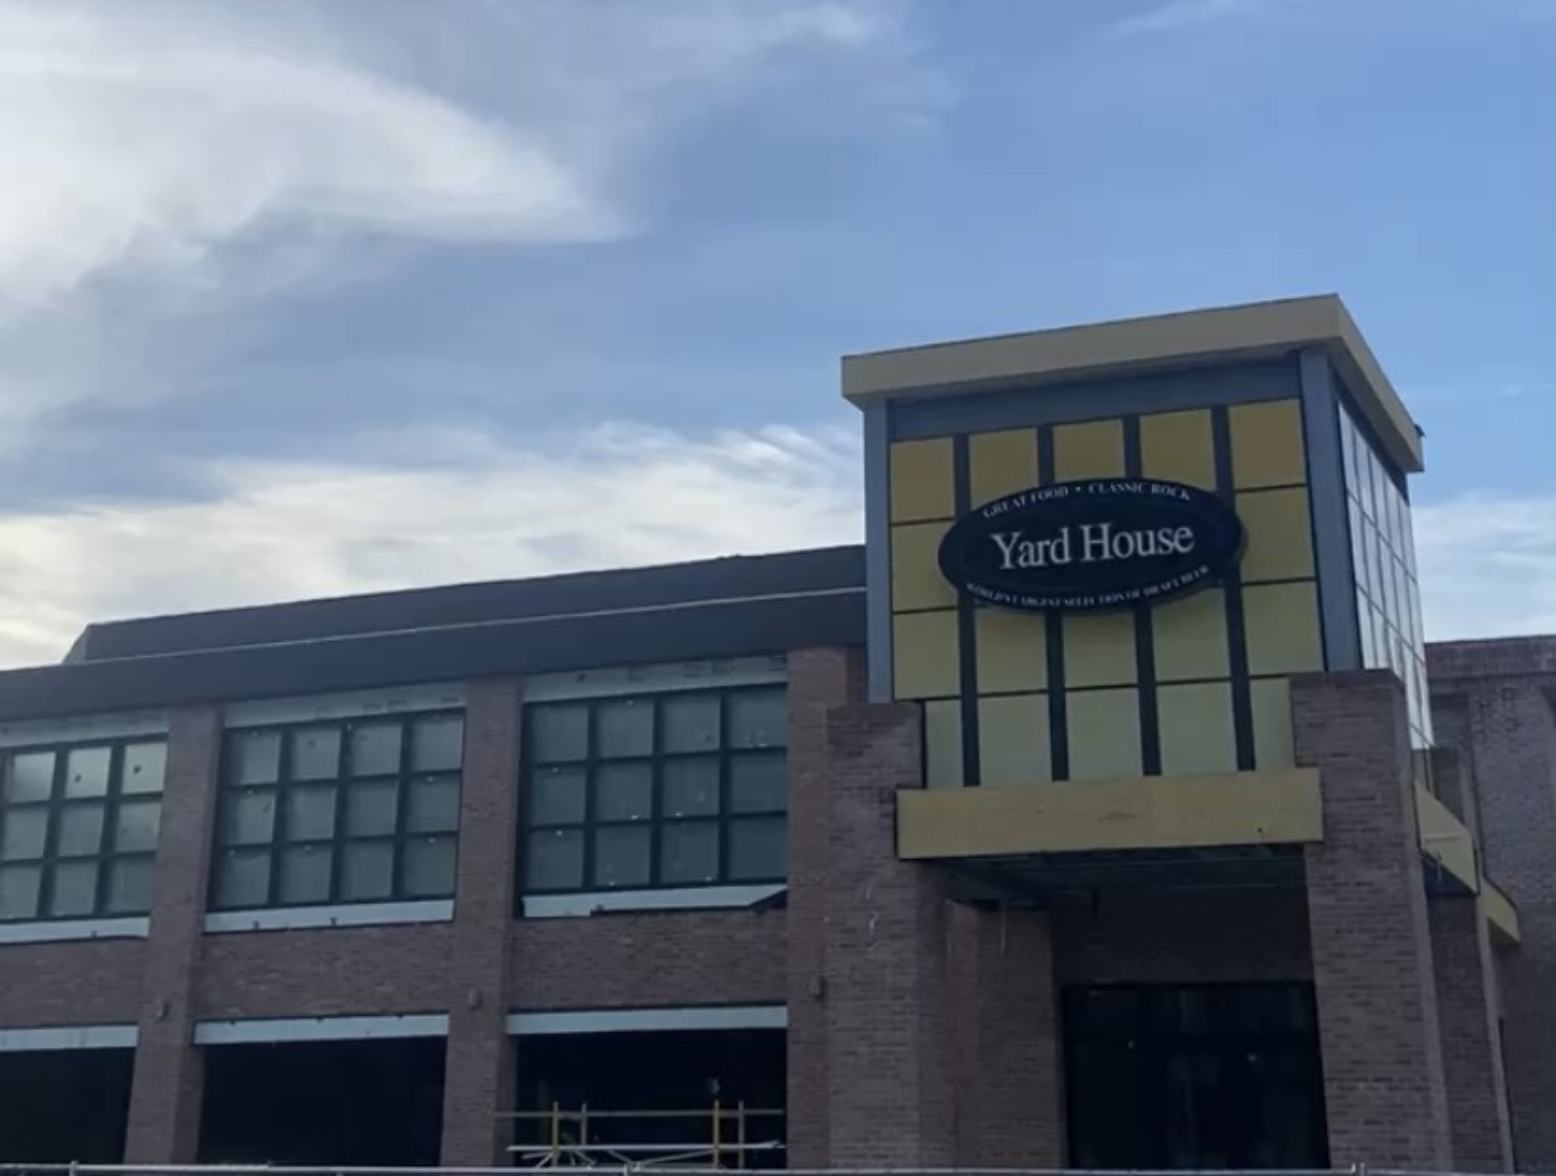 The front of the new Yardhouse Building on Water Street.